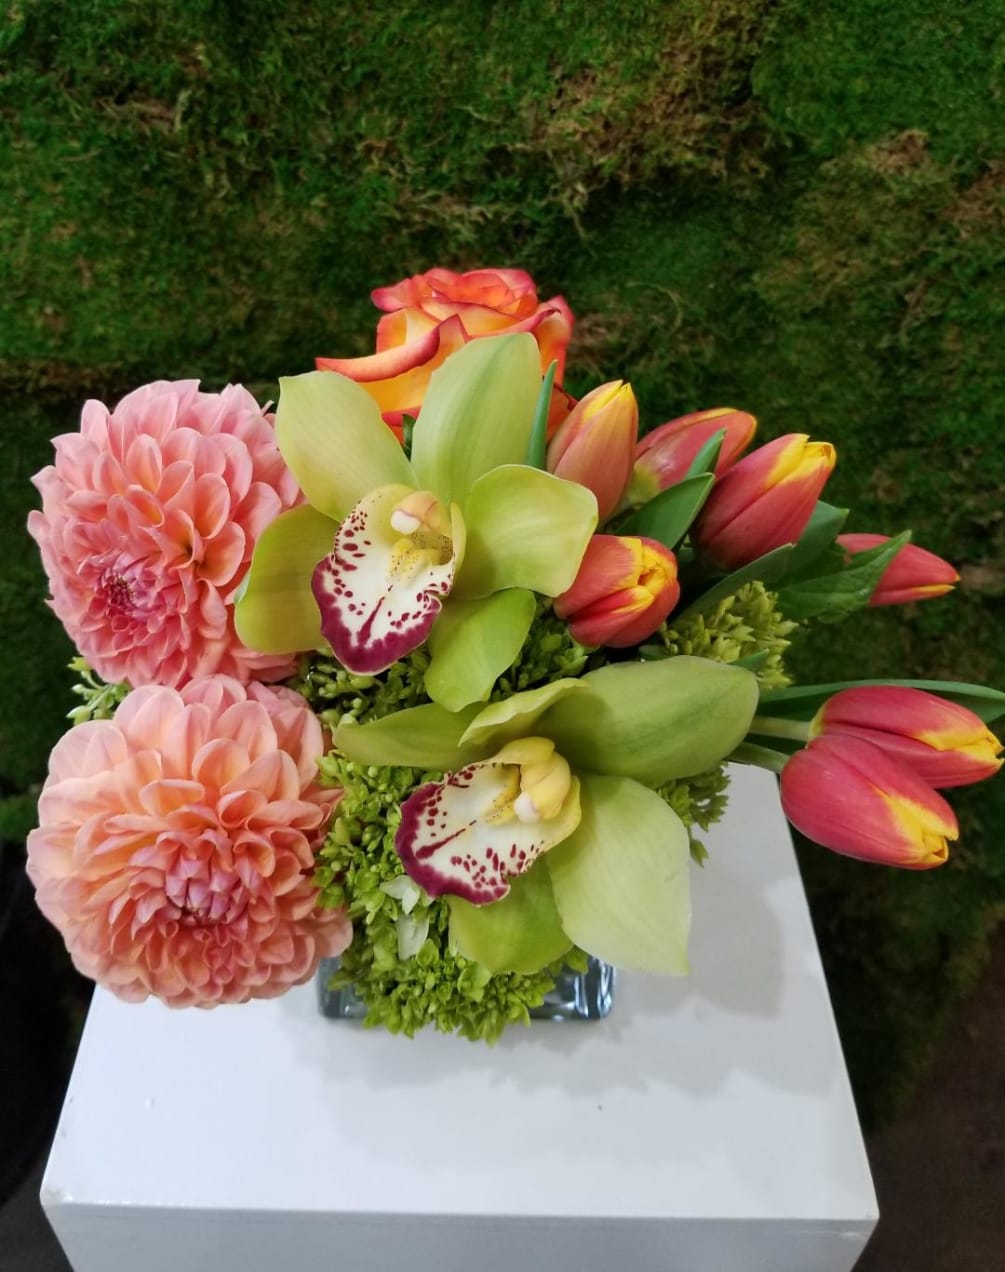 Say hello with this fun and cheerful arrangement making anyone smile with